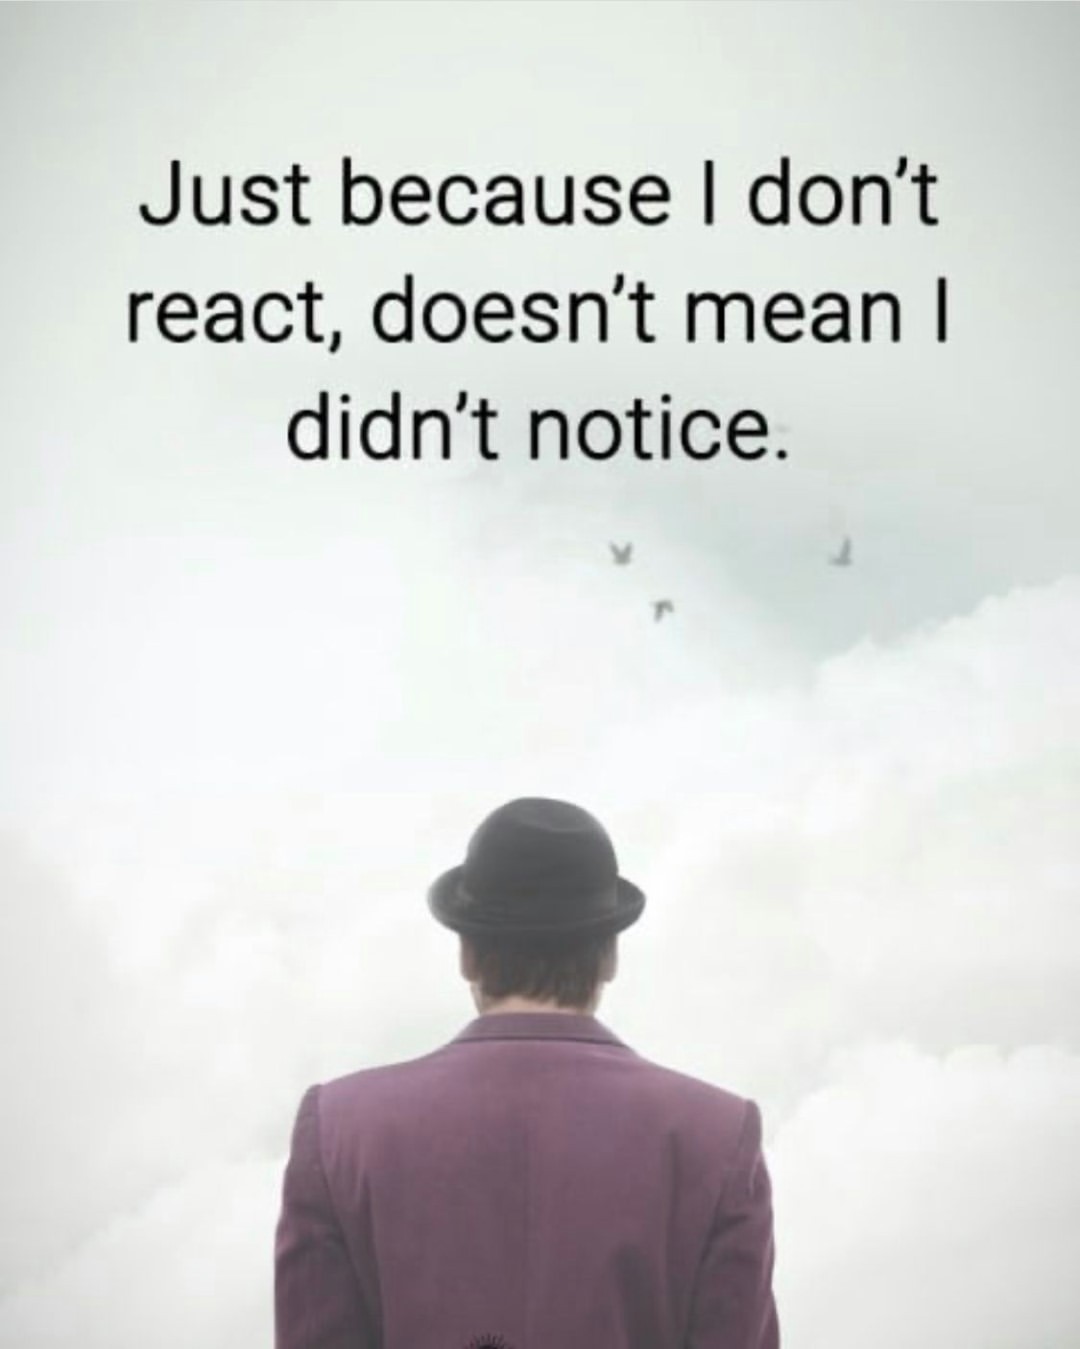 Just because I don't react, doesn't mean I didn't notice.